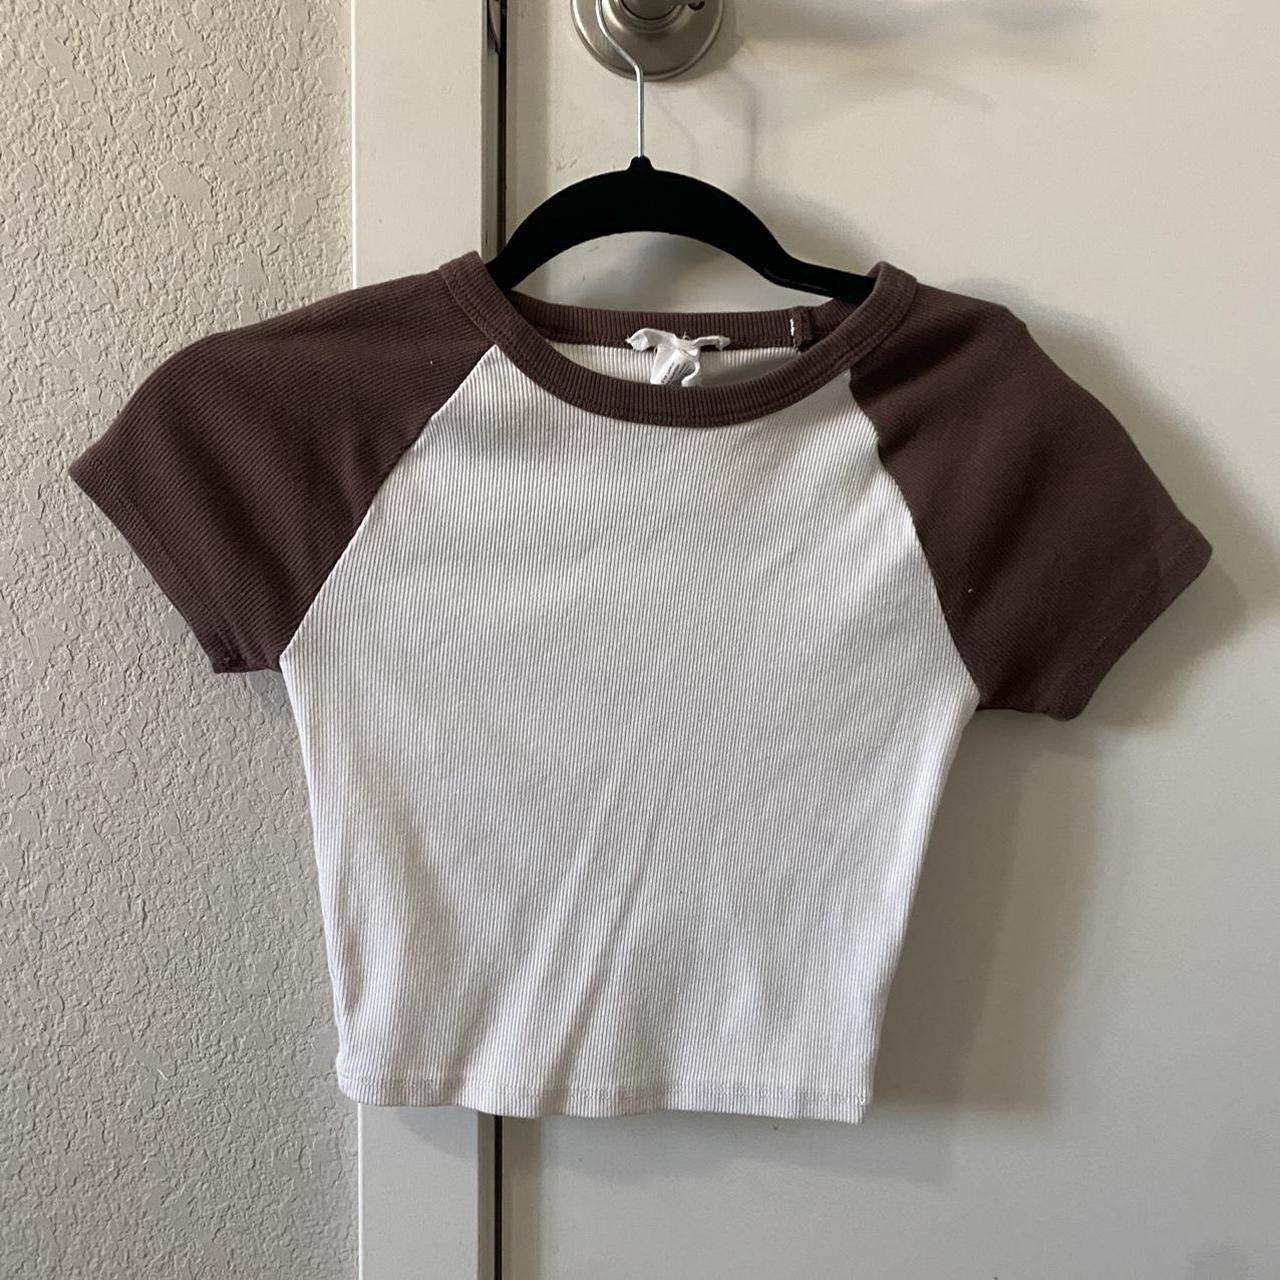 Tillys Women's White and Brown T-shirt